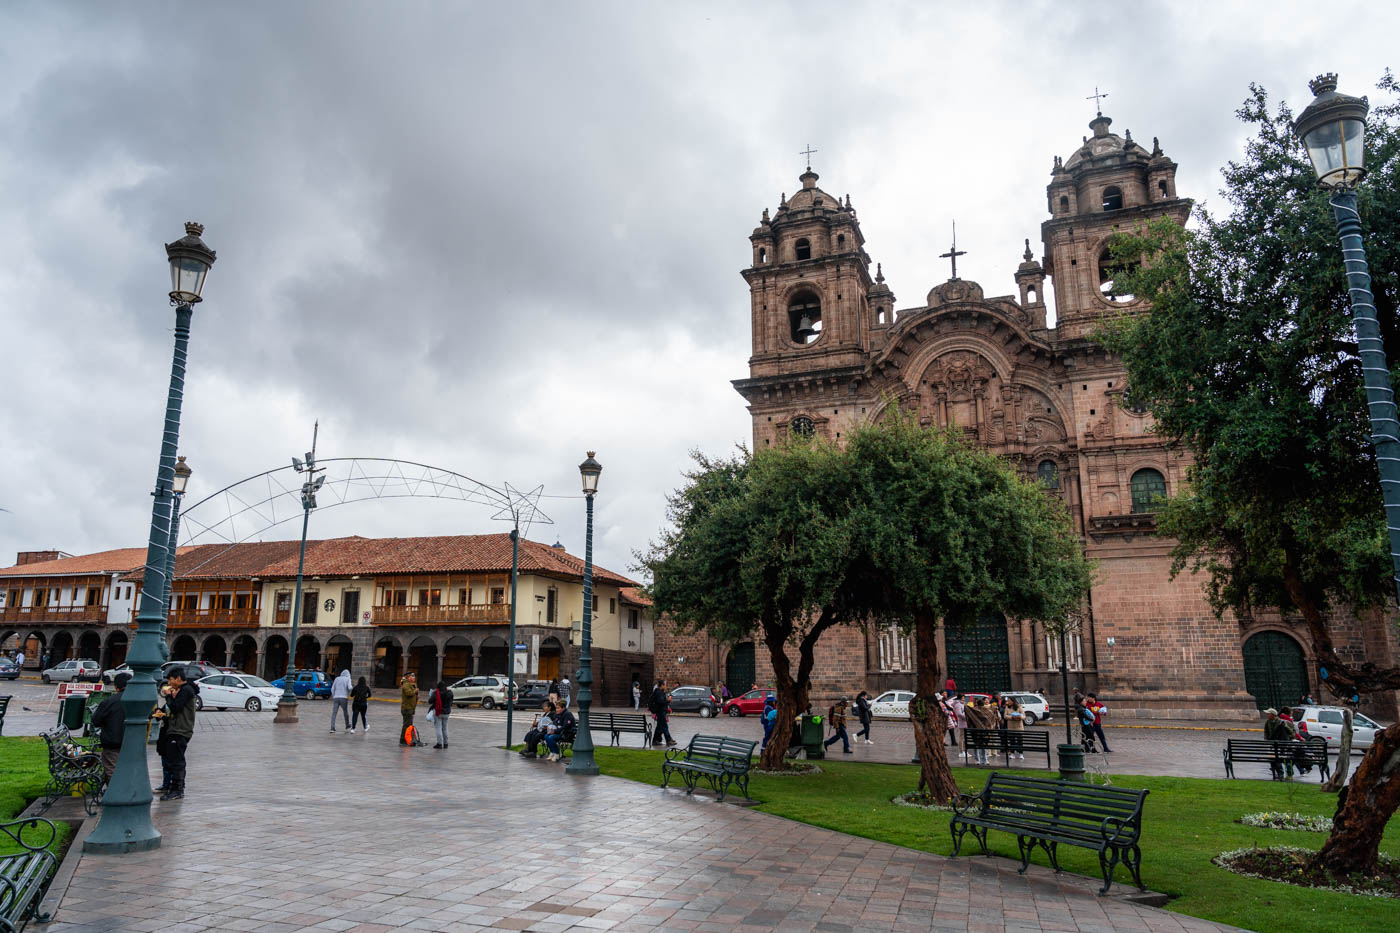 People in the park at Plaza de Armas in Cusco beside the Church of the Society of Jesus on an overcast day.